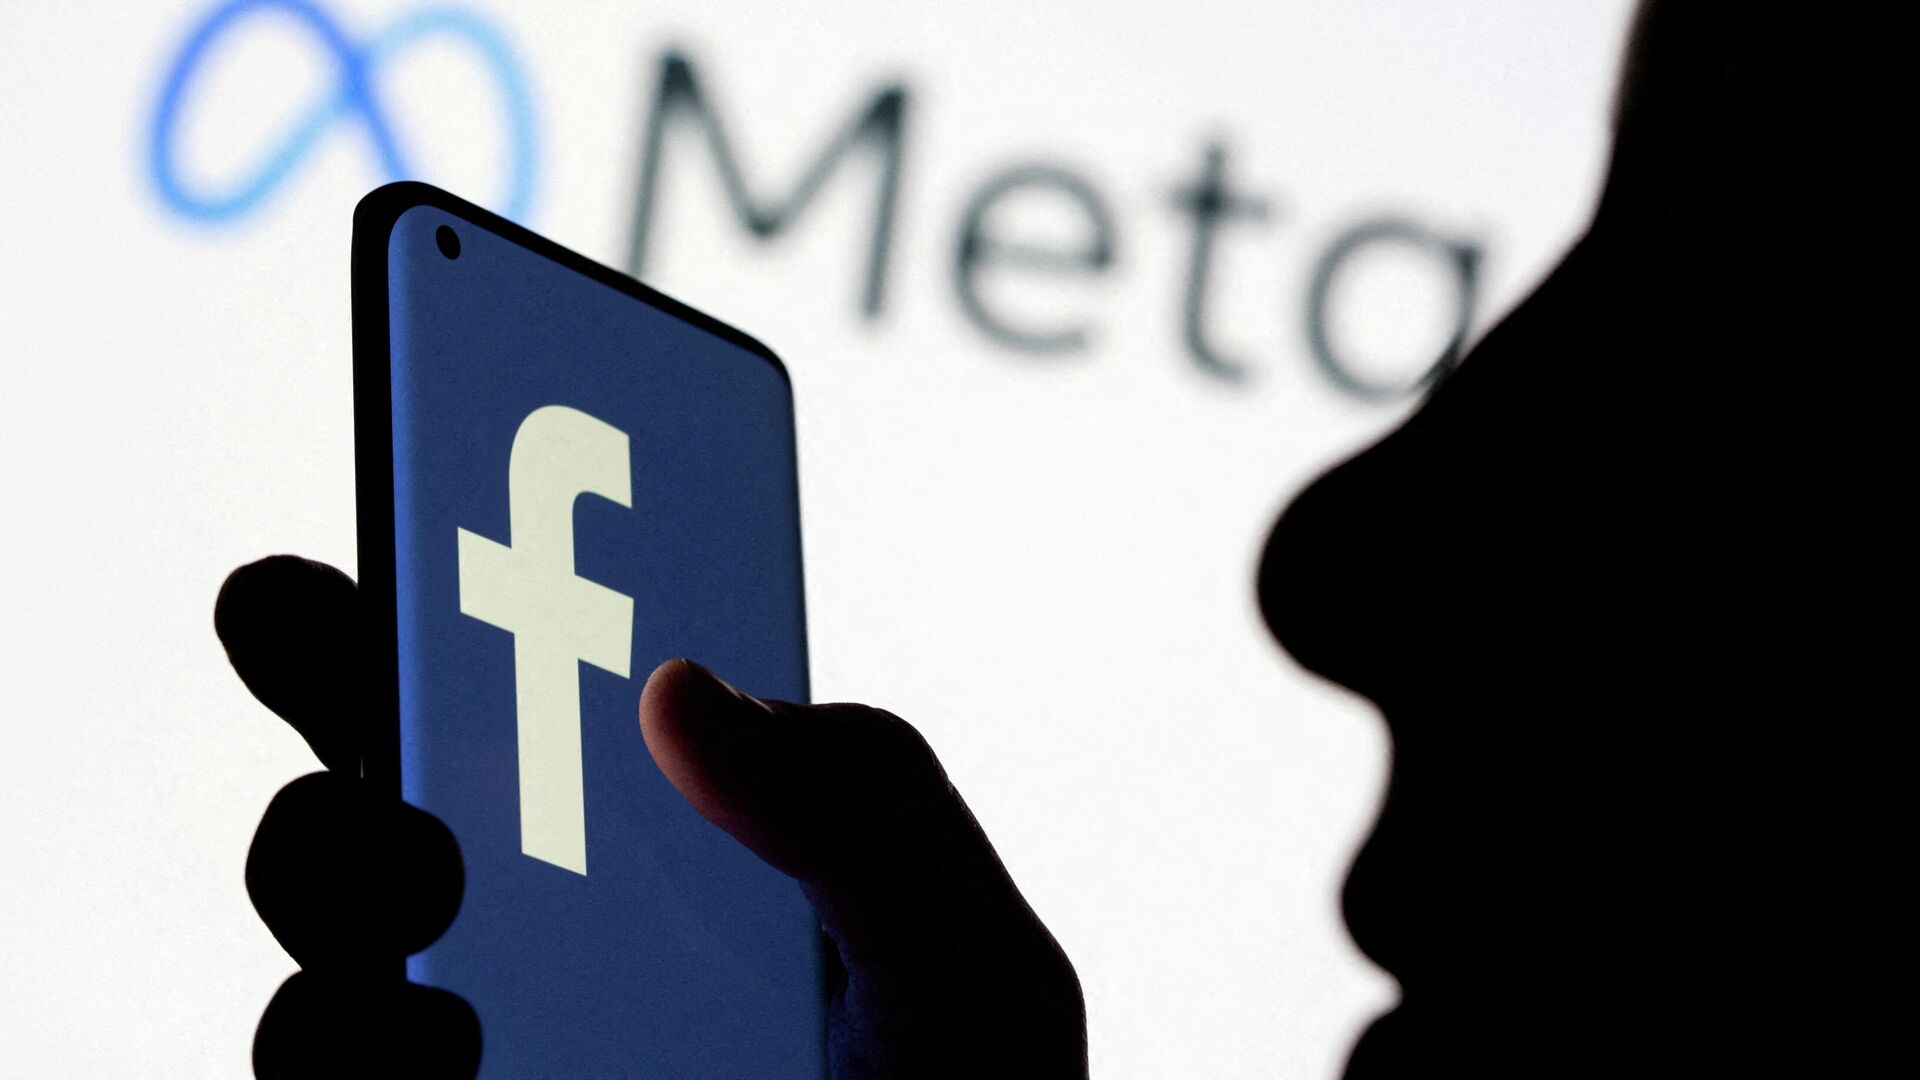 A woman holds smartphone with Facebook logo in front of a displayed Facebook's new rebrand logo Meta in this illustration picture taken October 28, 2021 - Sputnik International, 1920, 17.01.2022